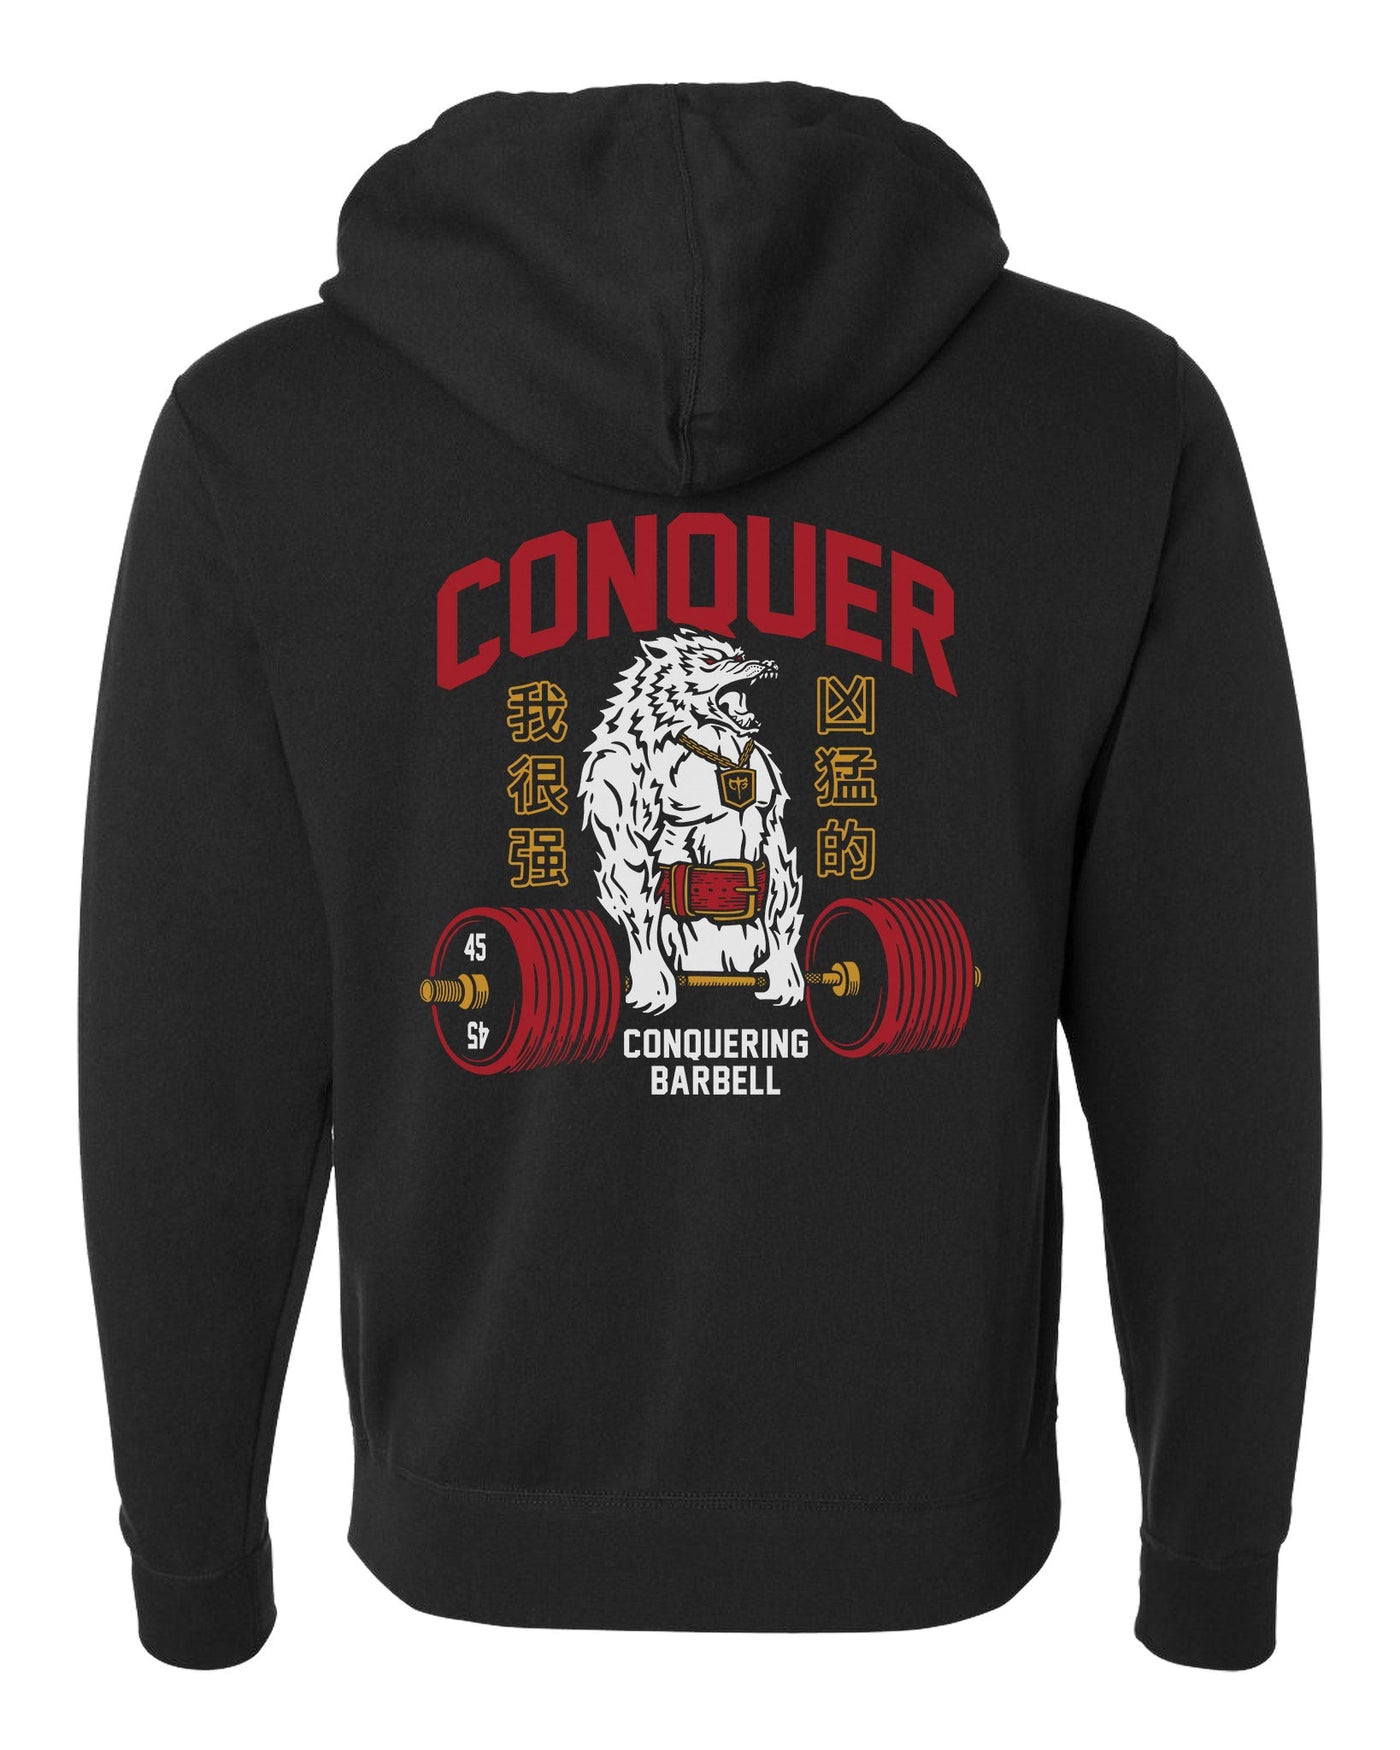 Conquer - Raging Gorilla - on Black Pullover Hoodie - Conquering Barbell